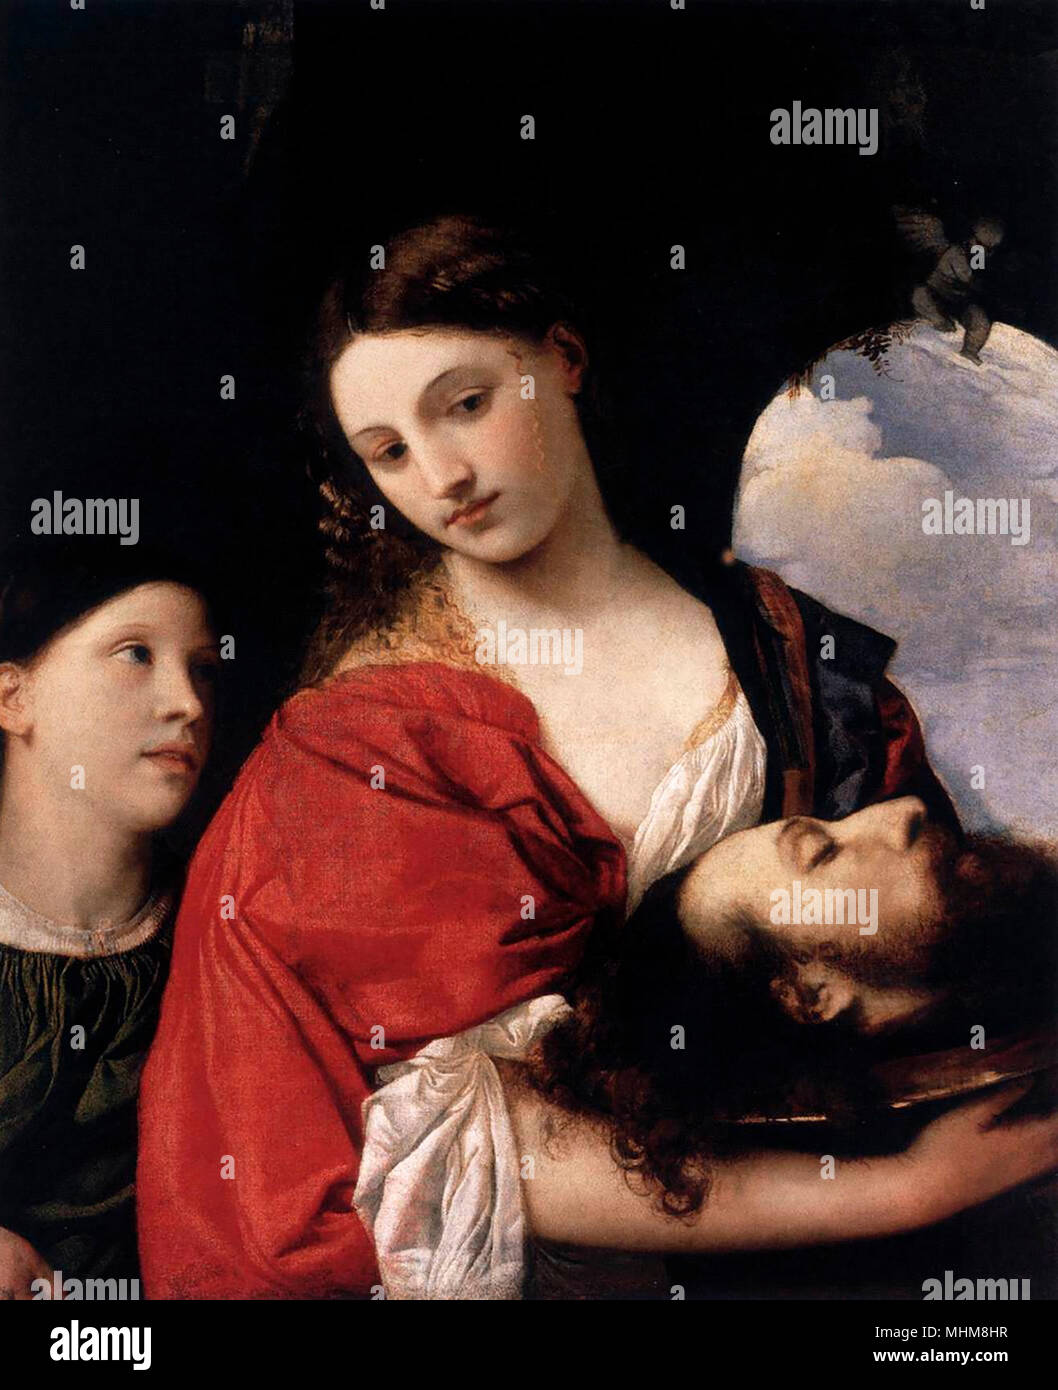 Salome with the Head of John the Baptist circa 1515, Titian Stock Photo